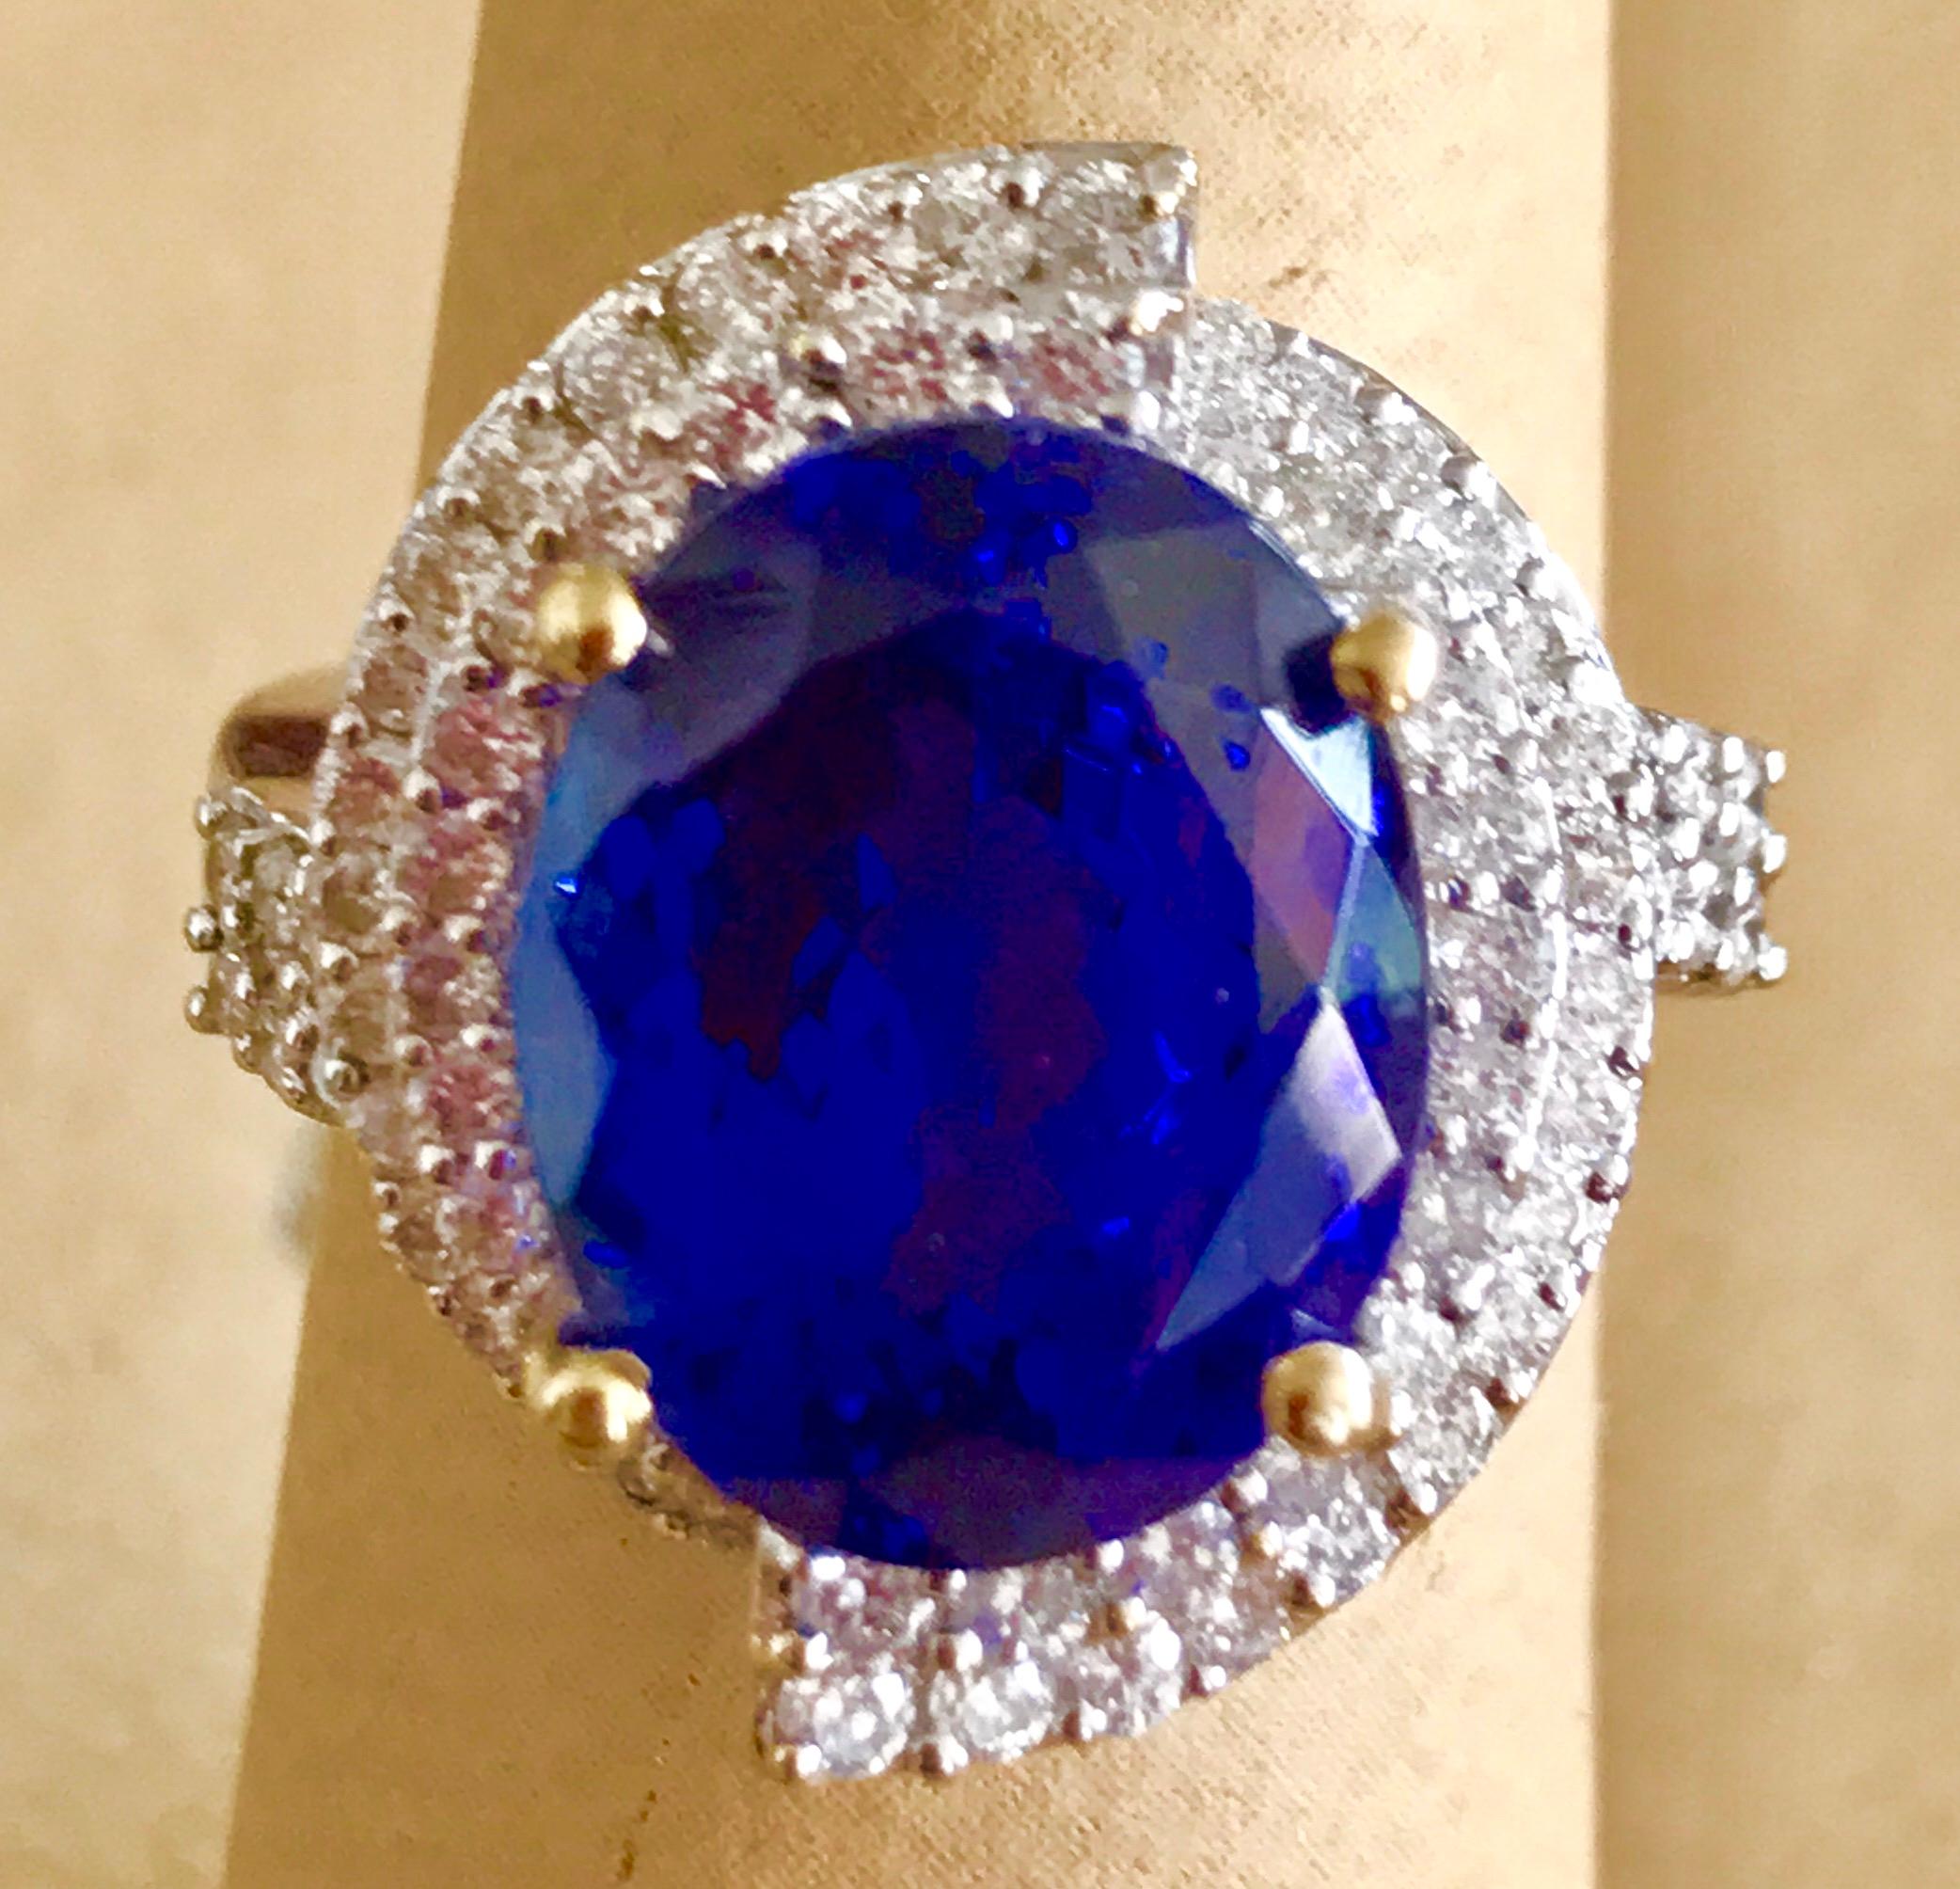 This extraordinary 8.5 carat tanzanite is a true gemstone that is highly treasured. It is surrounded by a total of 2.0 carats of shimmering white diamonds, which adds to the overall beauty and elegance of the piece. The oval-cut gem exhibits the